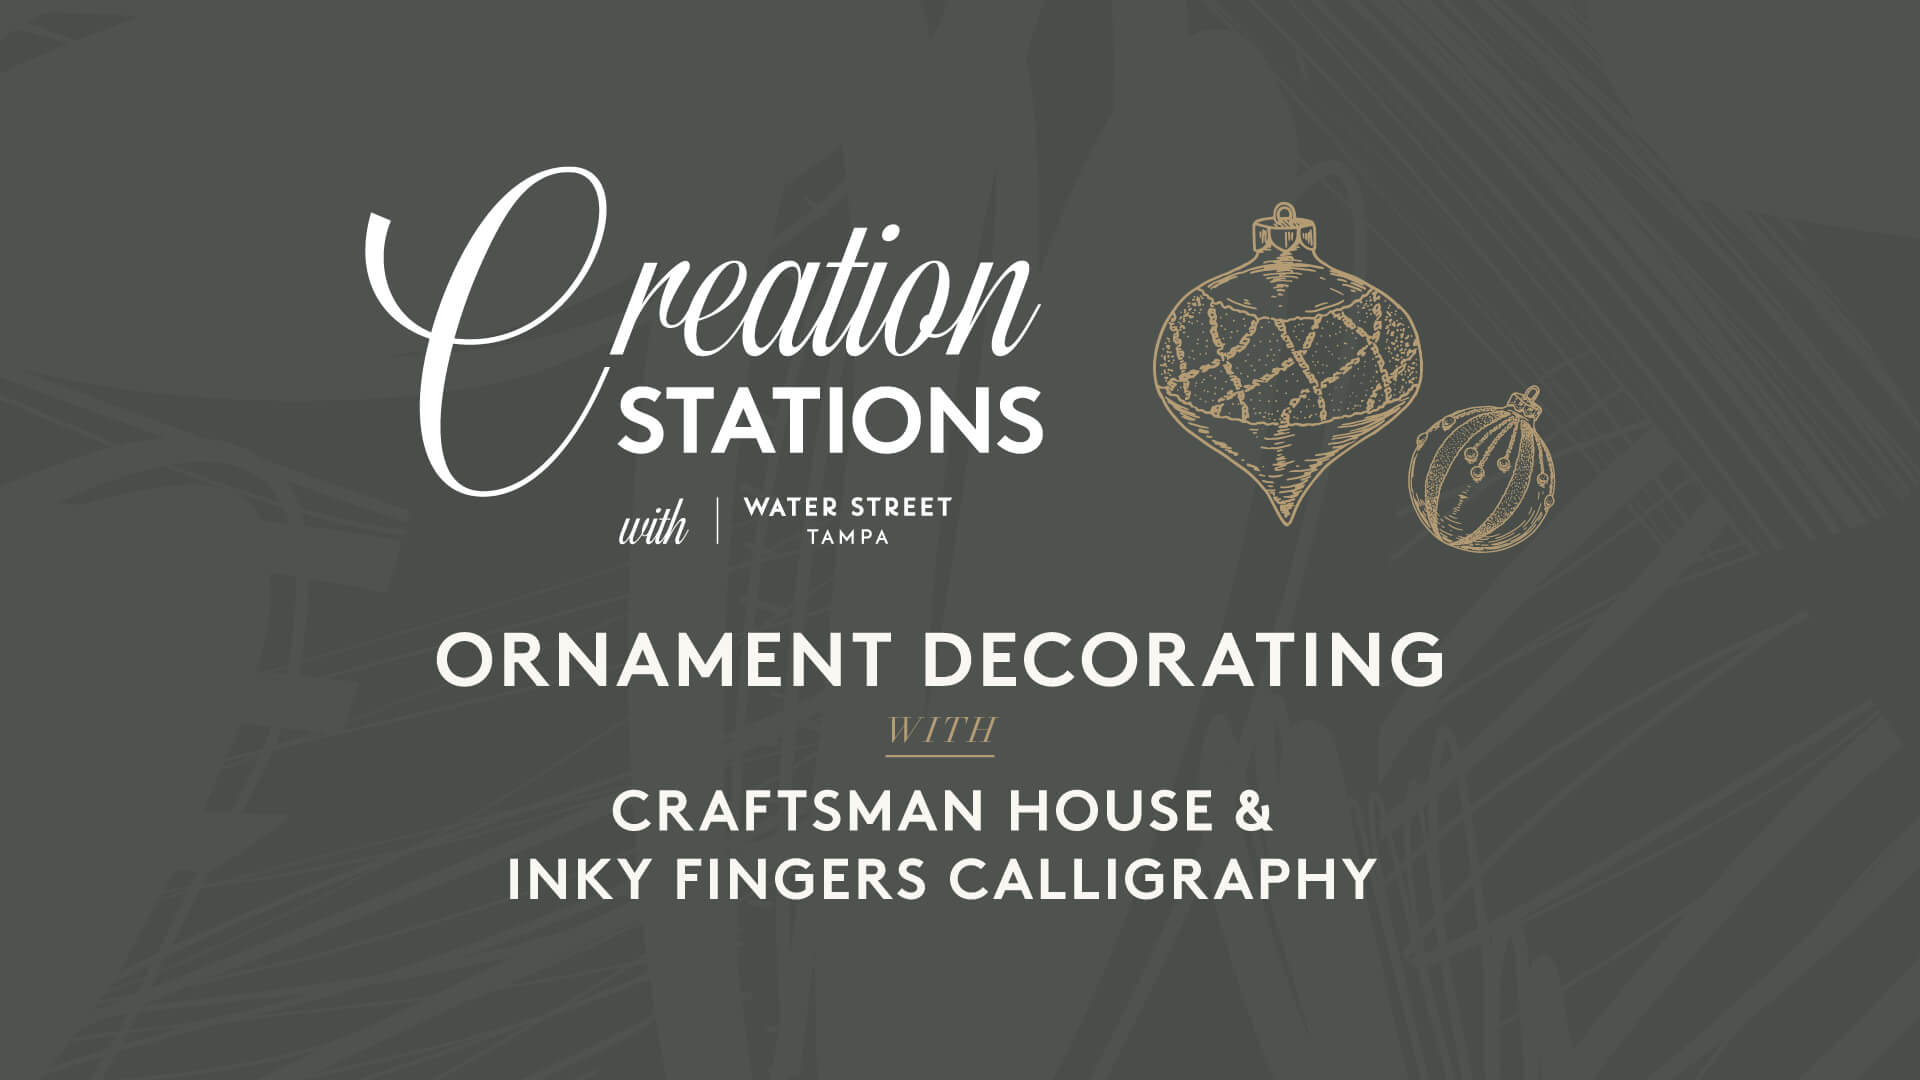 Holiday ornament decorating creation station graphic